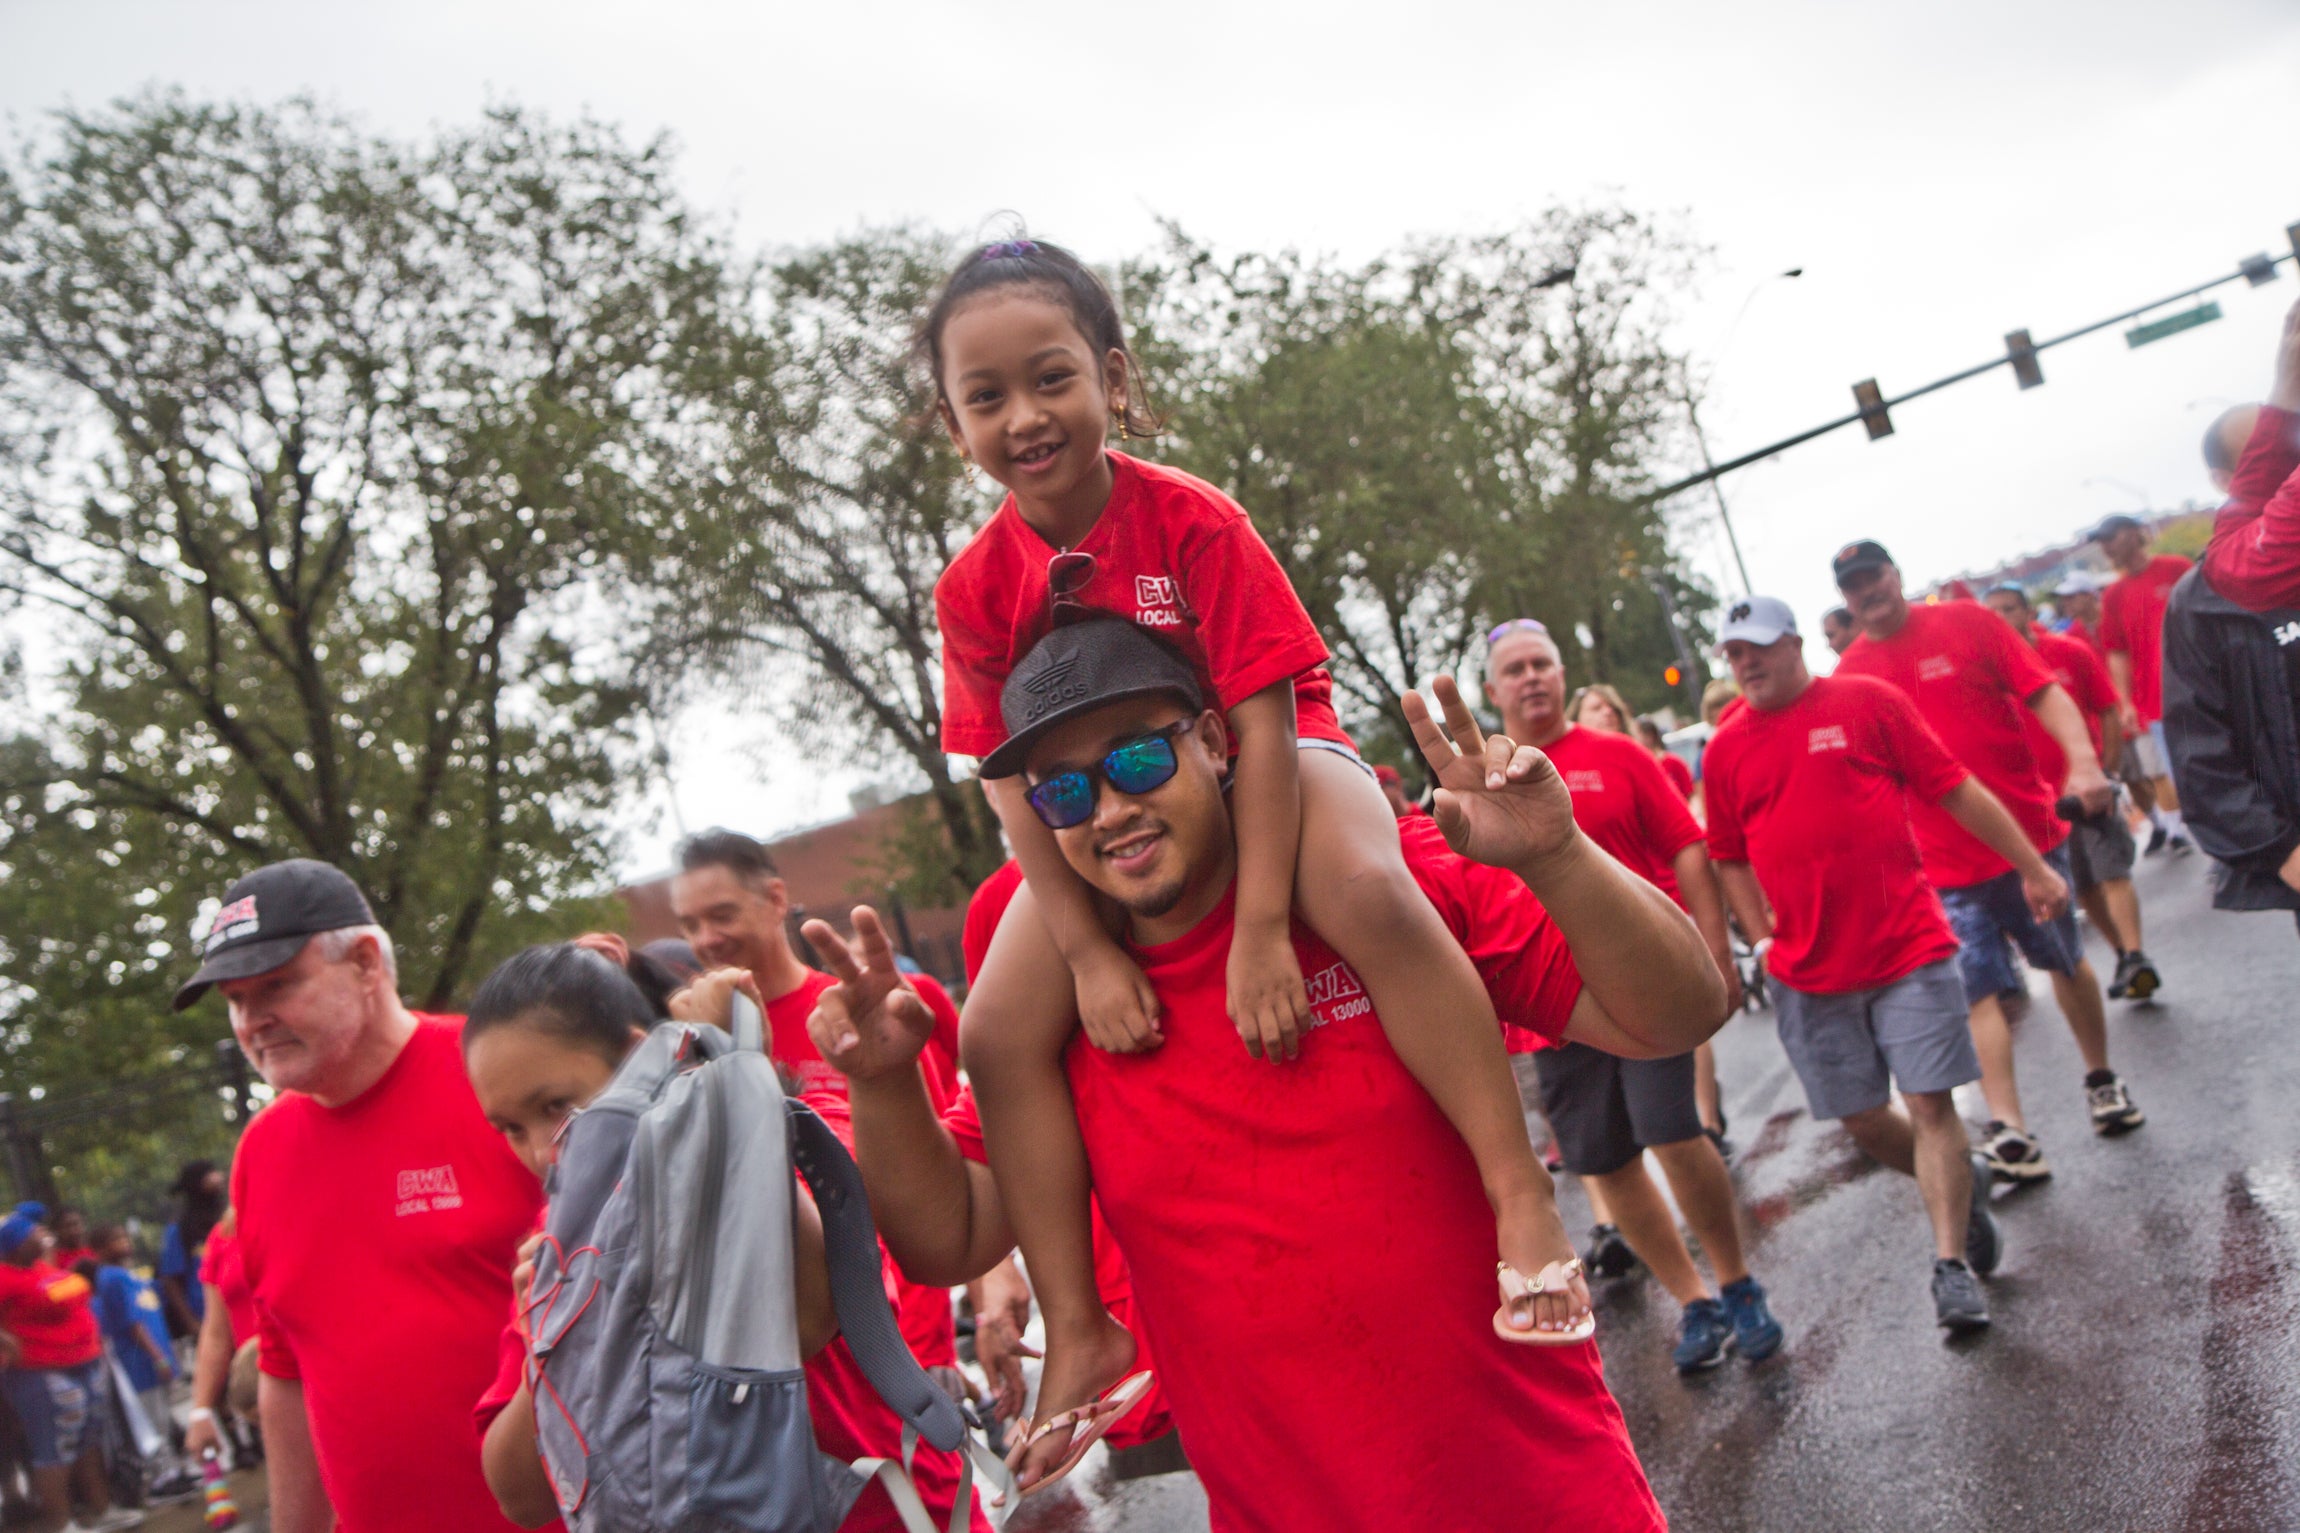 Philadelphia Labor Day parade draws thousands to waterfront WHYY